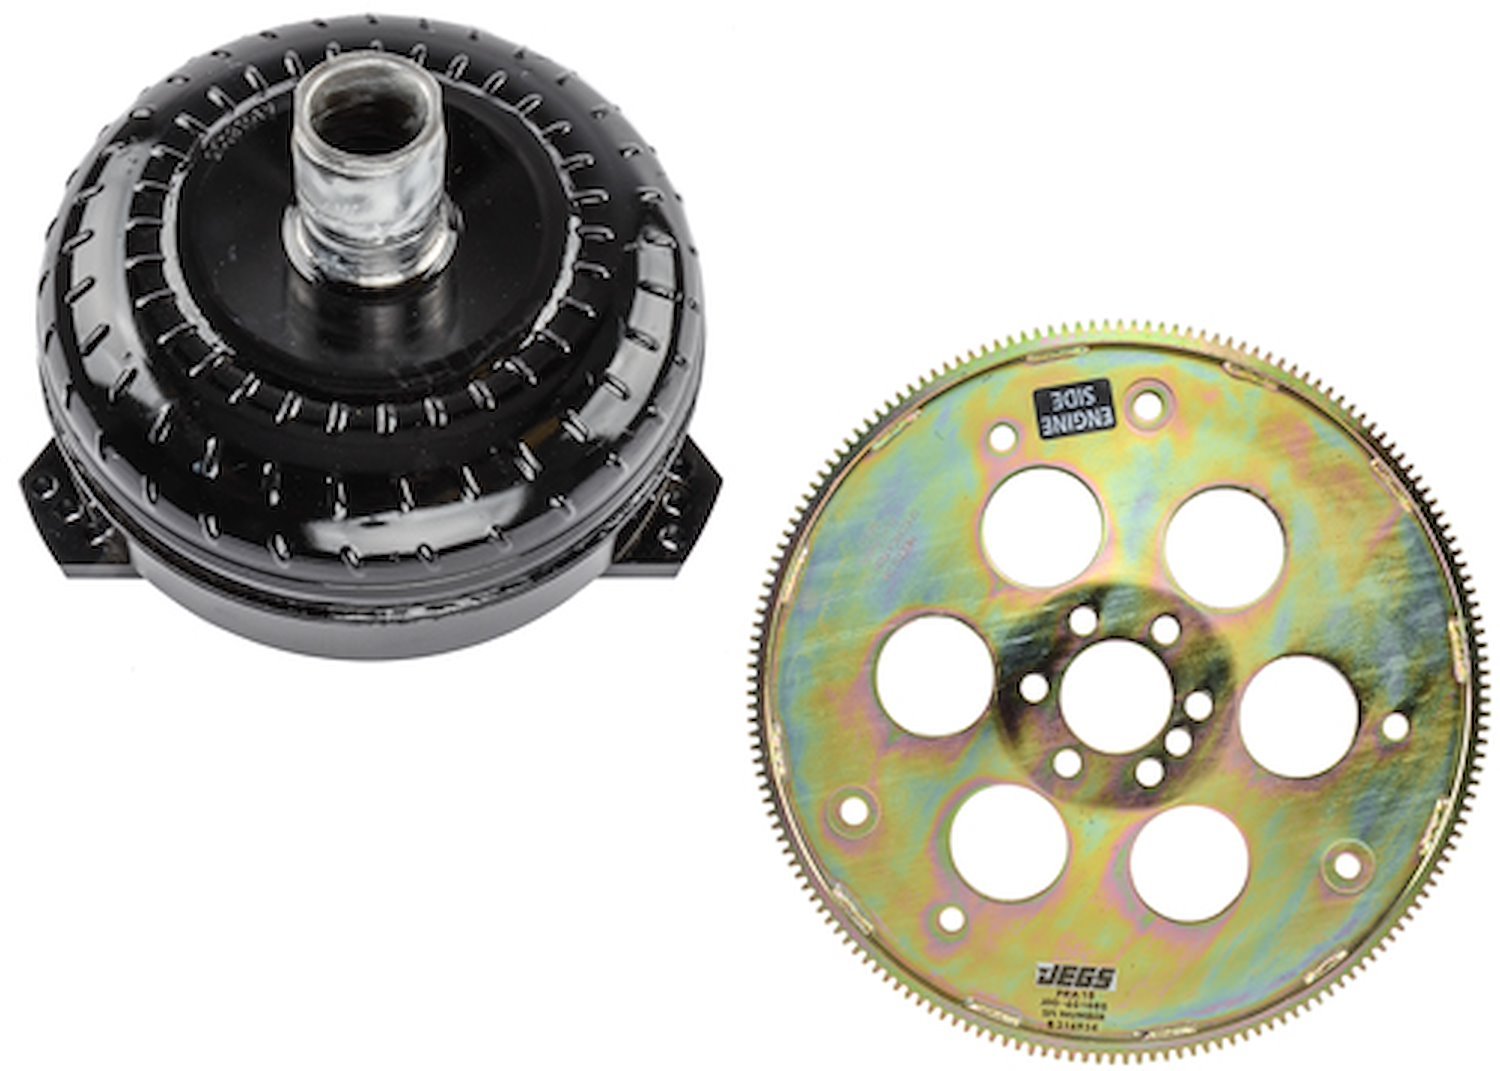 Torque Converter Kit for GM 4L80E/4L85E Mounted to an LS Series Engine [2900-3200 RPM Stall Speed]